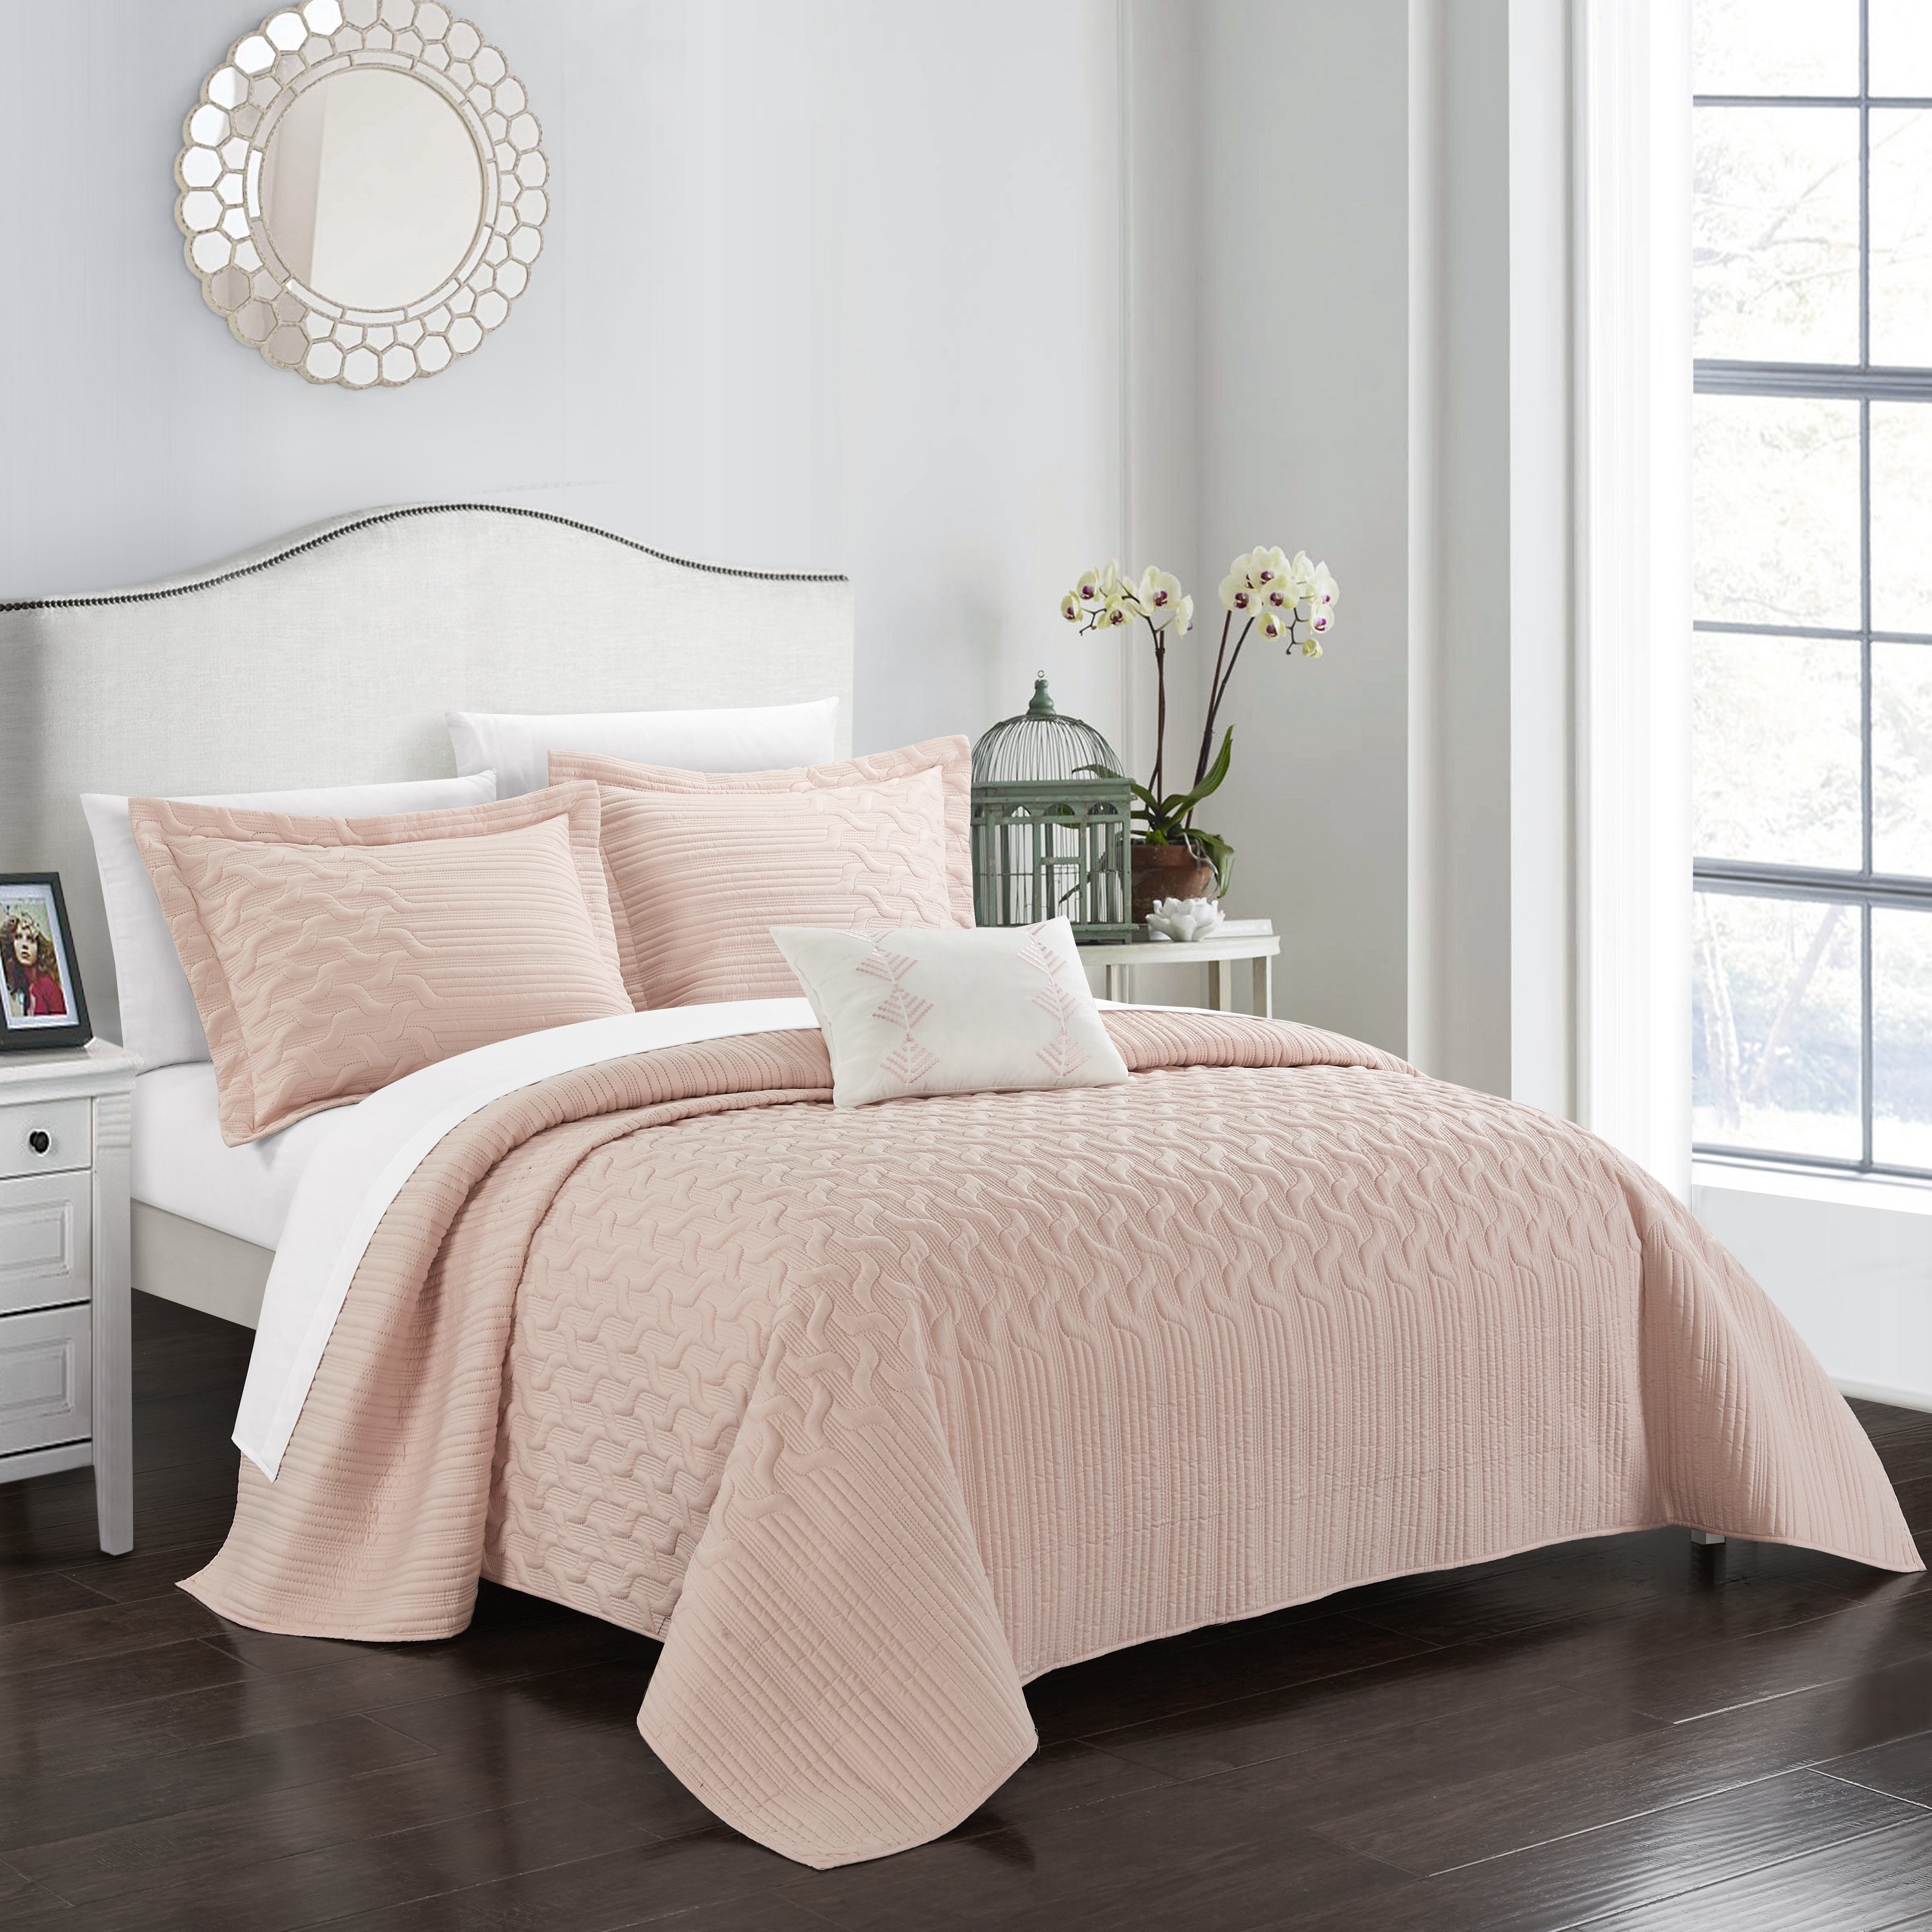 Shaliya 4 Or 3 Piece Quilt Cover Set Interlaced Vine Pattern Quilted Bed In A Bag - Blush, Twin